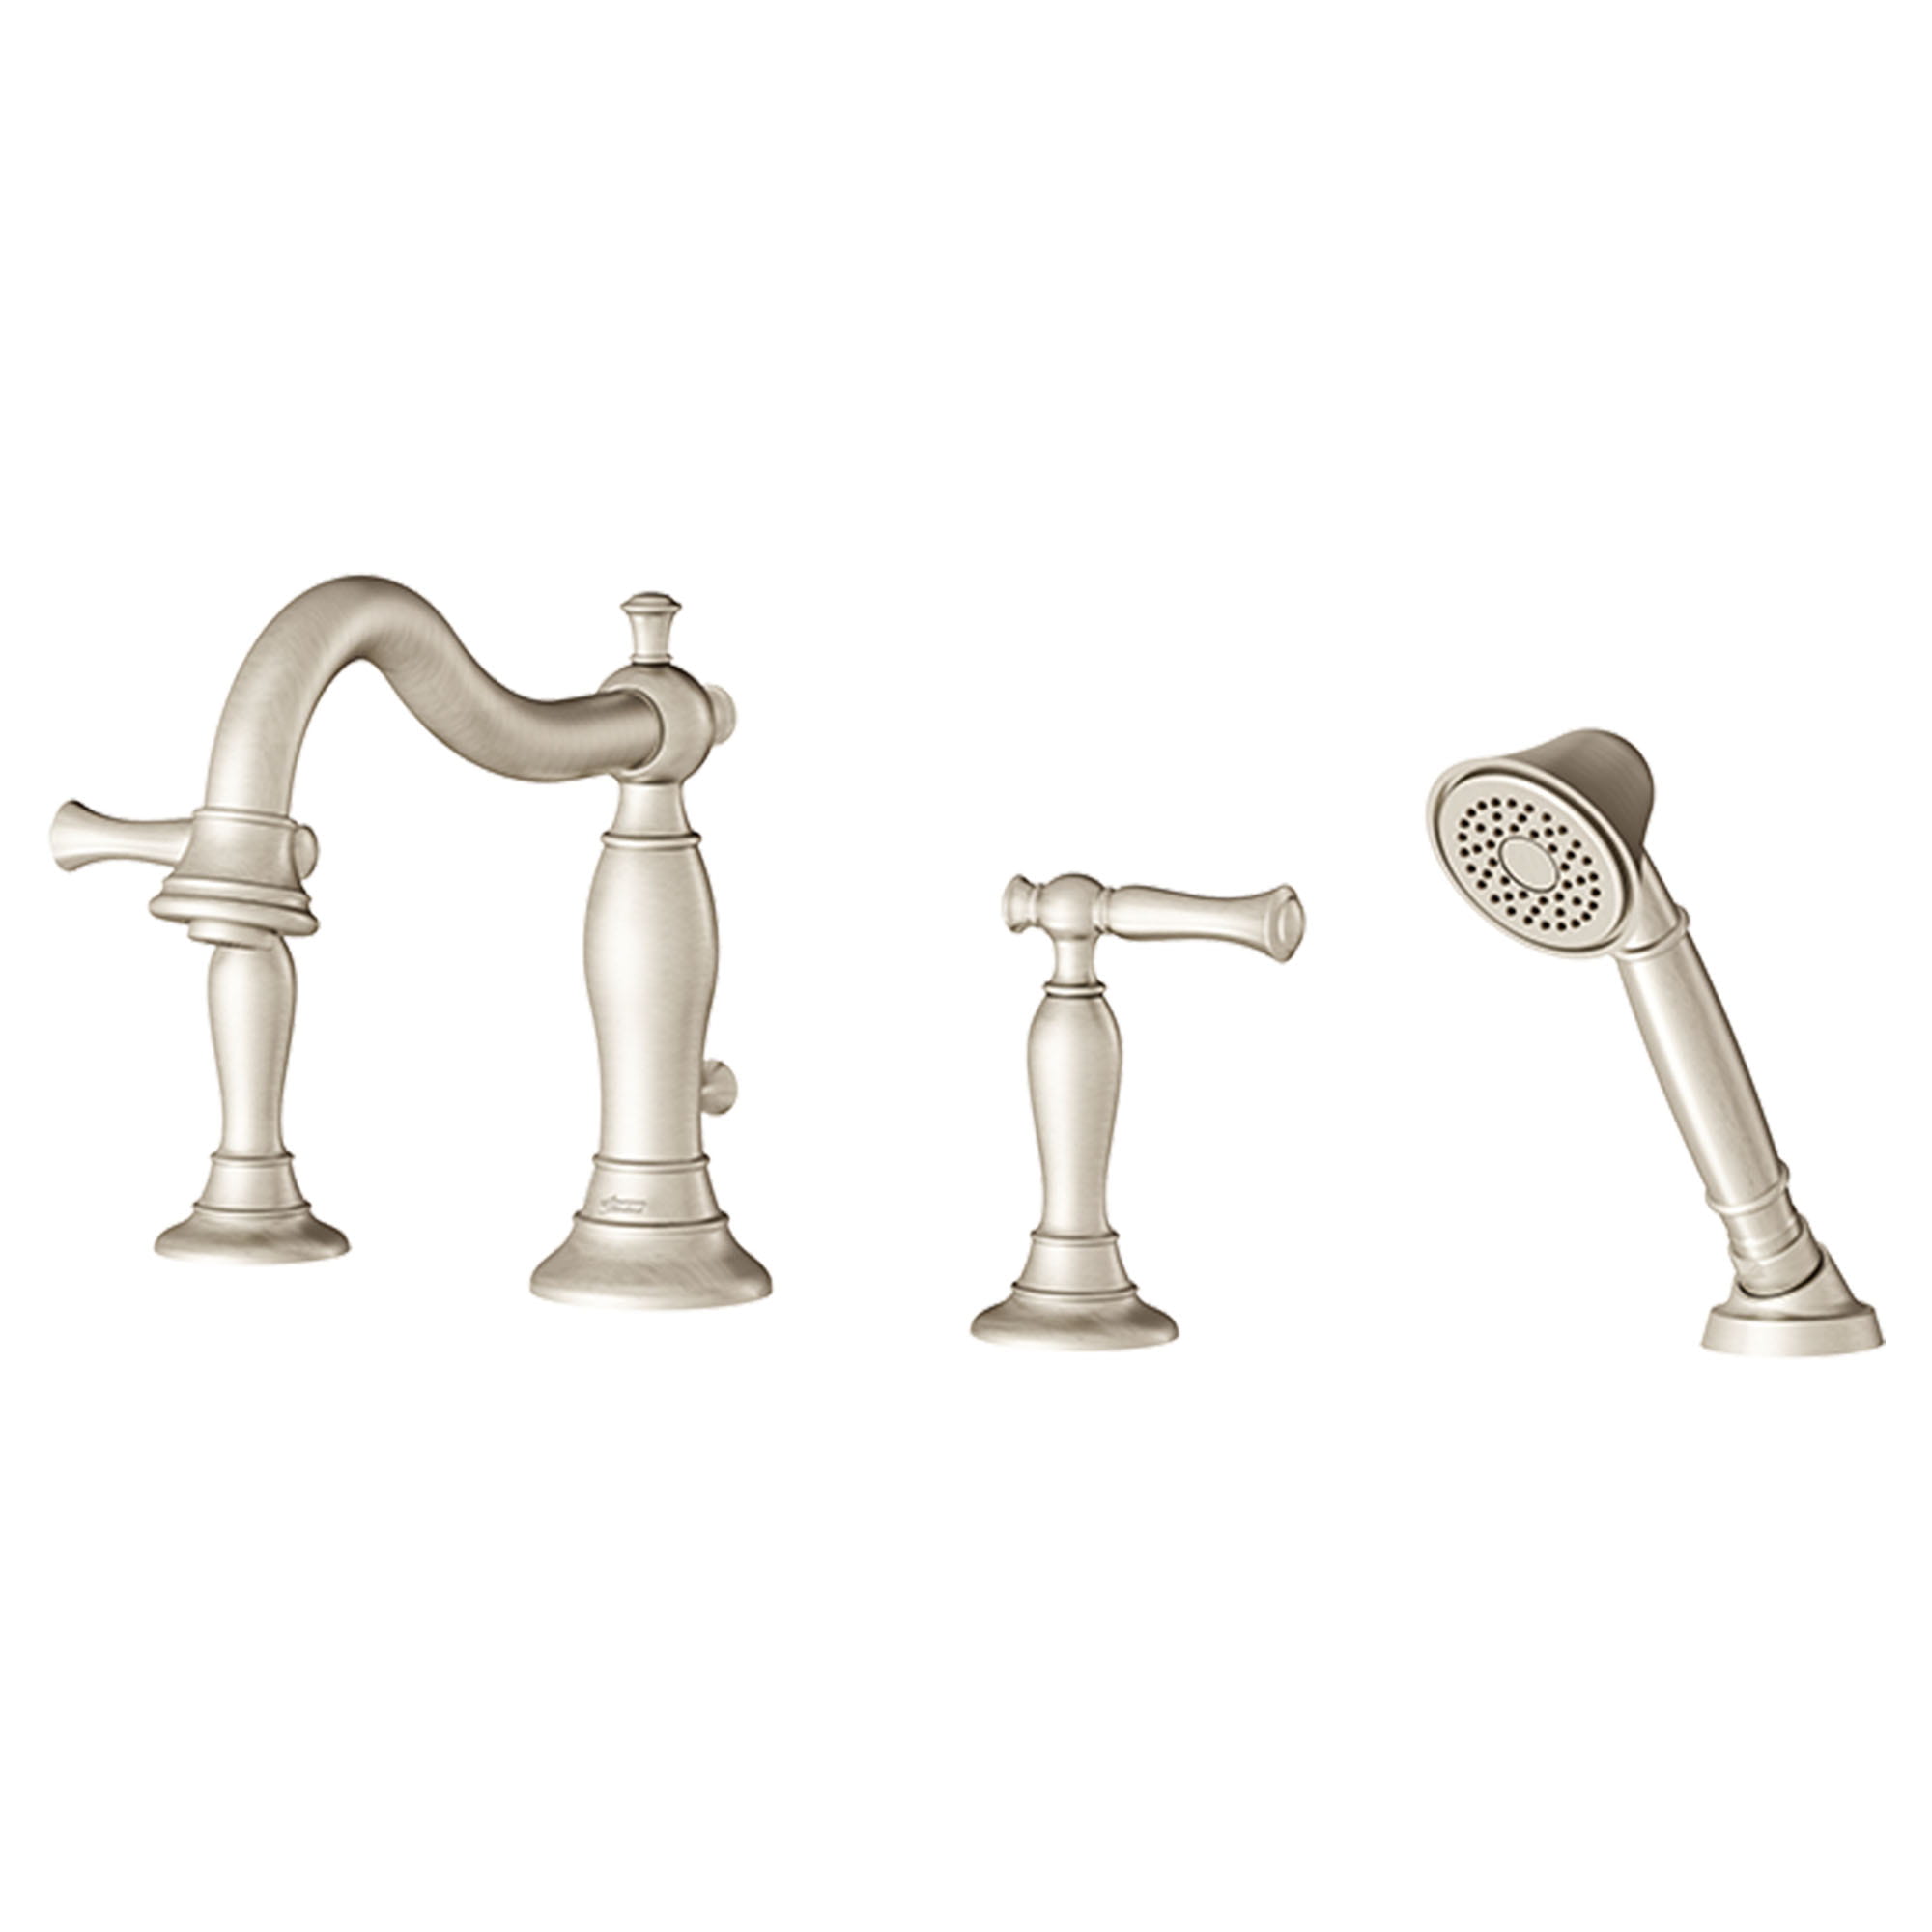 Quentin Bathtub Faucet With  Lever Handles and Personal Shower for Flash Rough In Valve   BRUSHED NICKEL